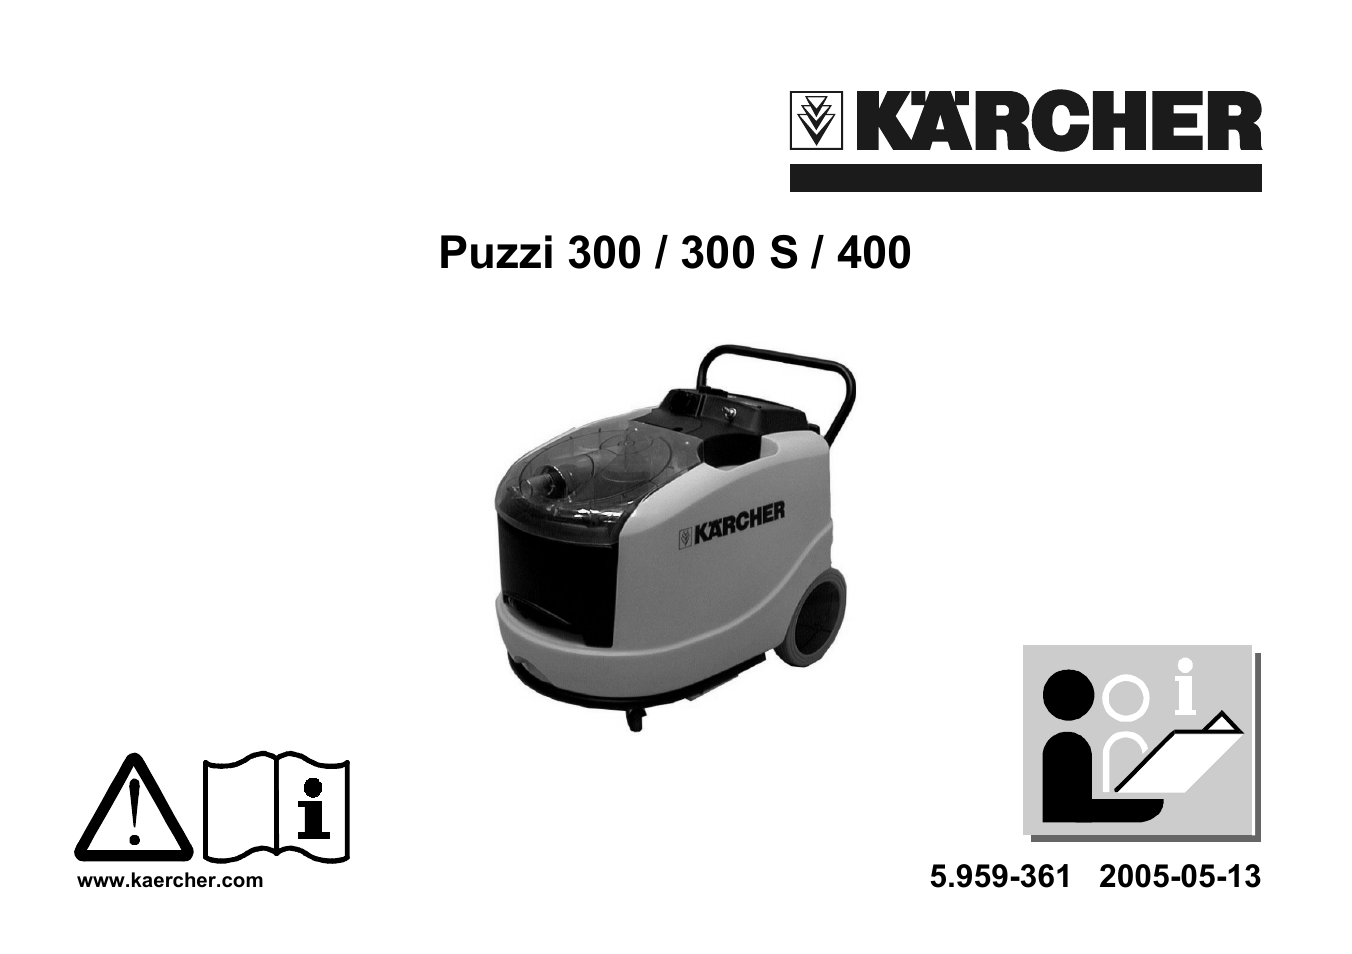 Karcher PUZZI 300 S User Manual | 15 pages | Also for: PUZZI 300